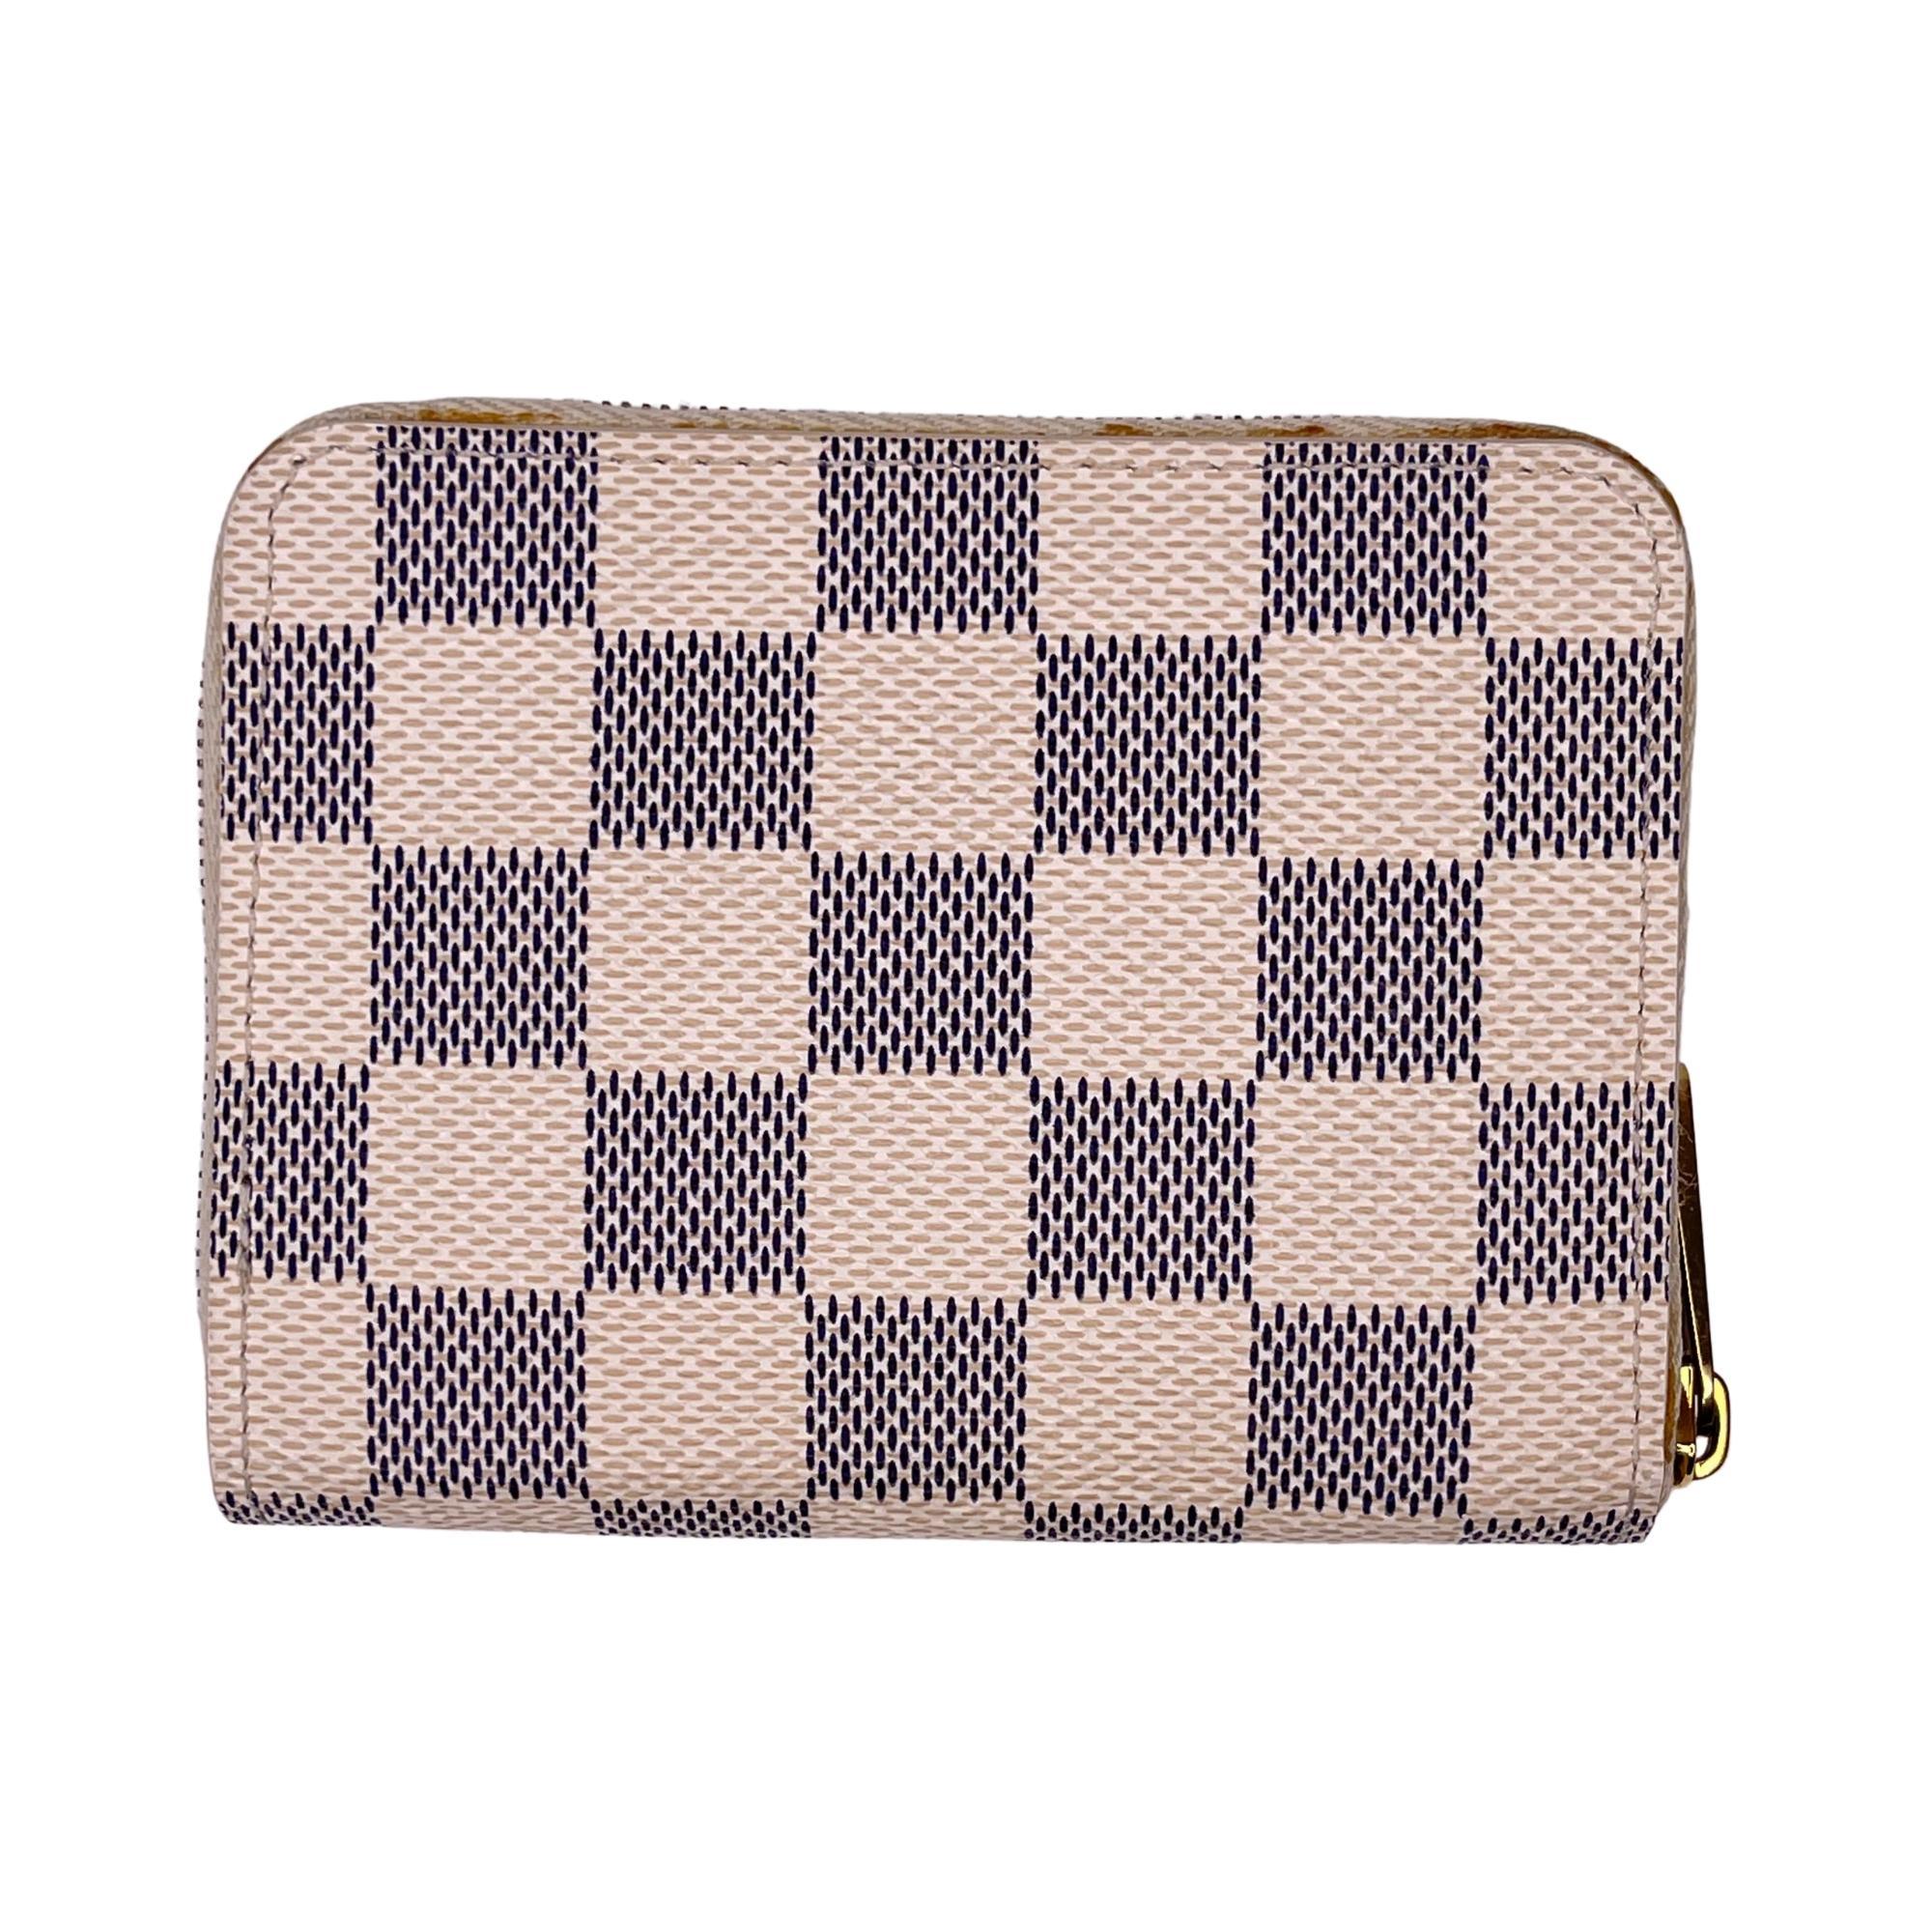 COLOR: Damier azur
MATERIAL: Coated canvas
DATE CODE: SN1028
MEASURES: H 3.5” x L 4.5” x D .75”
COMES WITH: Dust bag
CONDITION: Good - slight discolouration, staining. 
 
Made in France